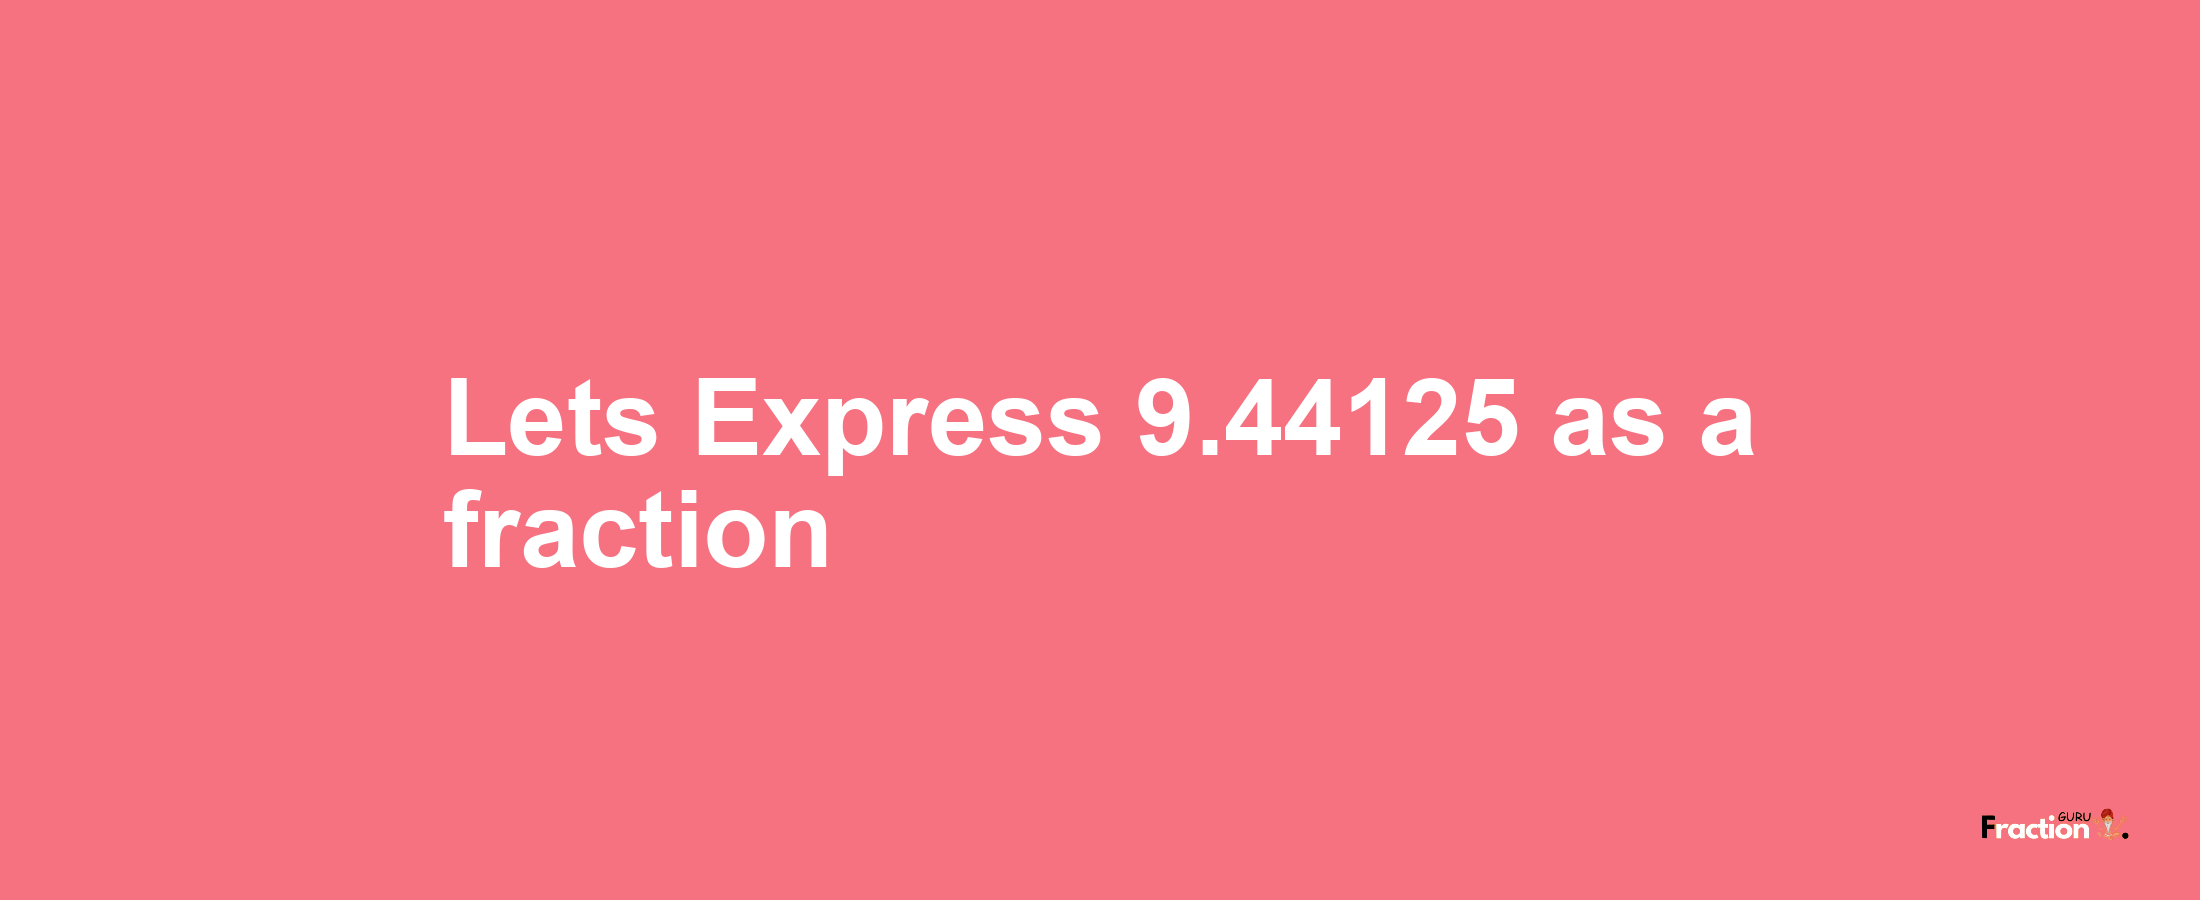 Lets Express 9.44125 as afraction